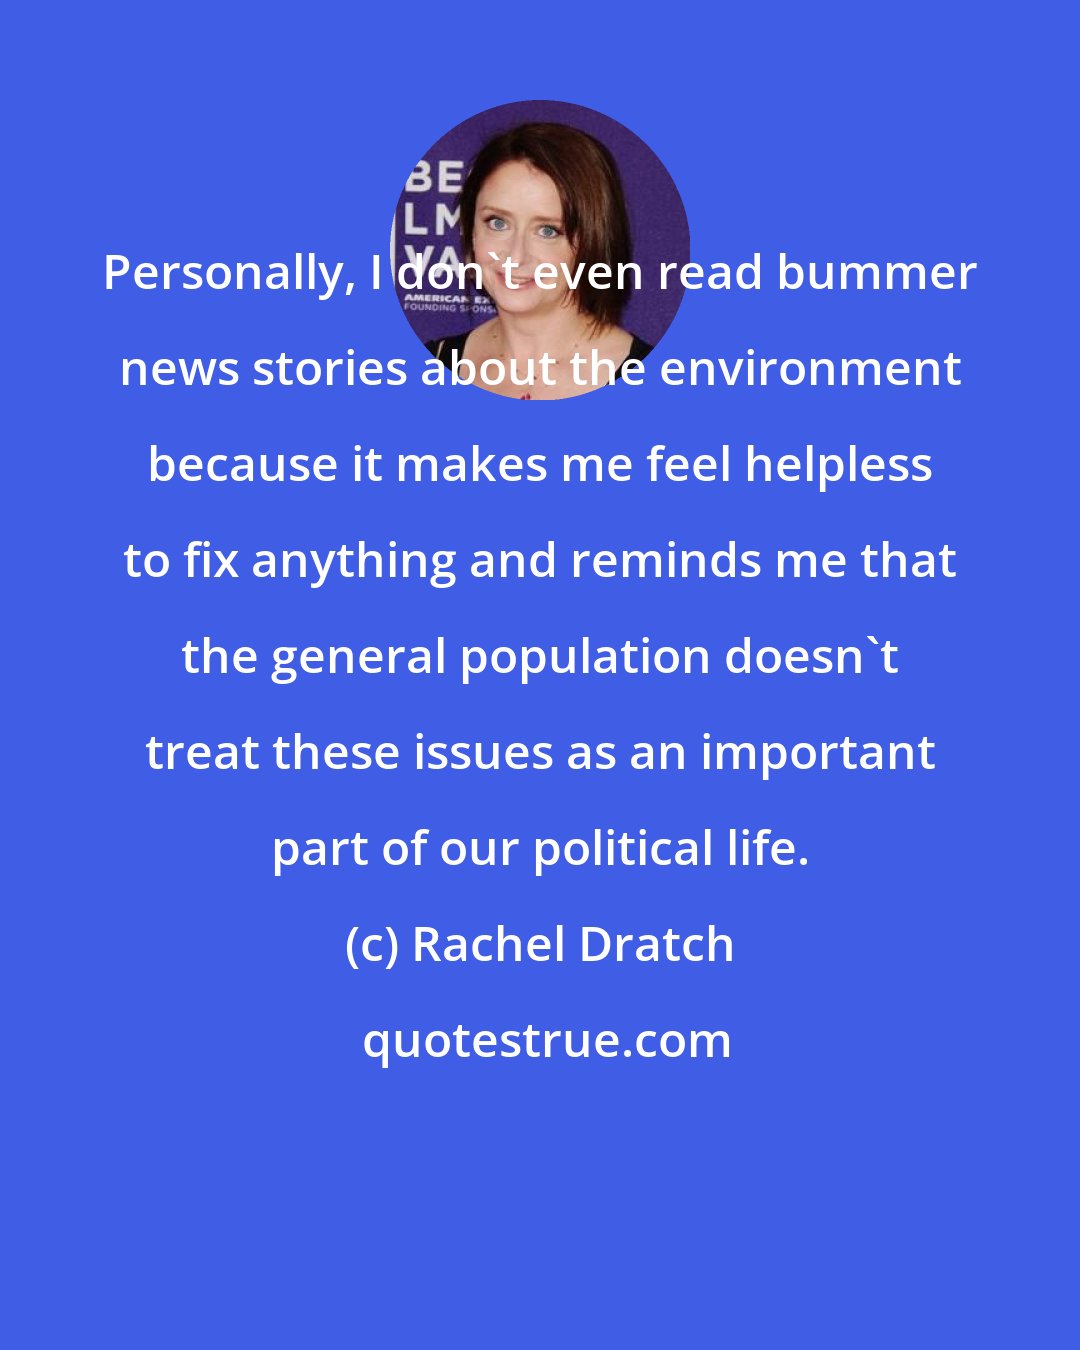 Rachel Dratch: Personally, I don't even read bummer news stories about the environment because it makes me feel helpless to fix anything and reminds me that the general population doesn't treat these issues as an important part of our political life.